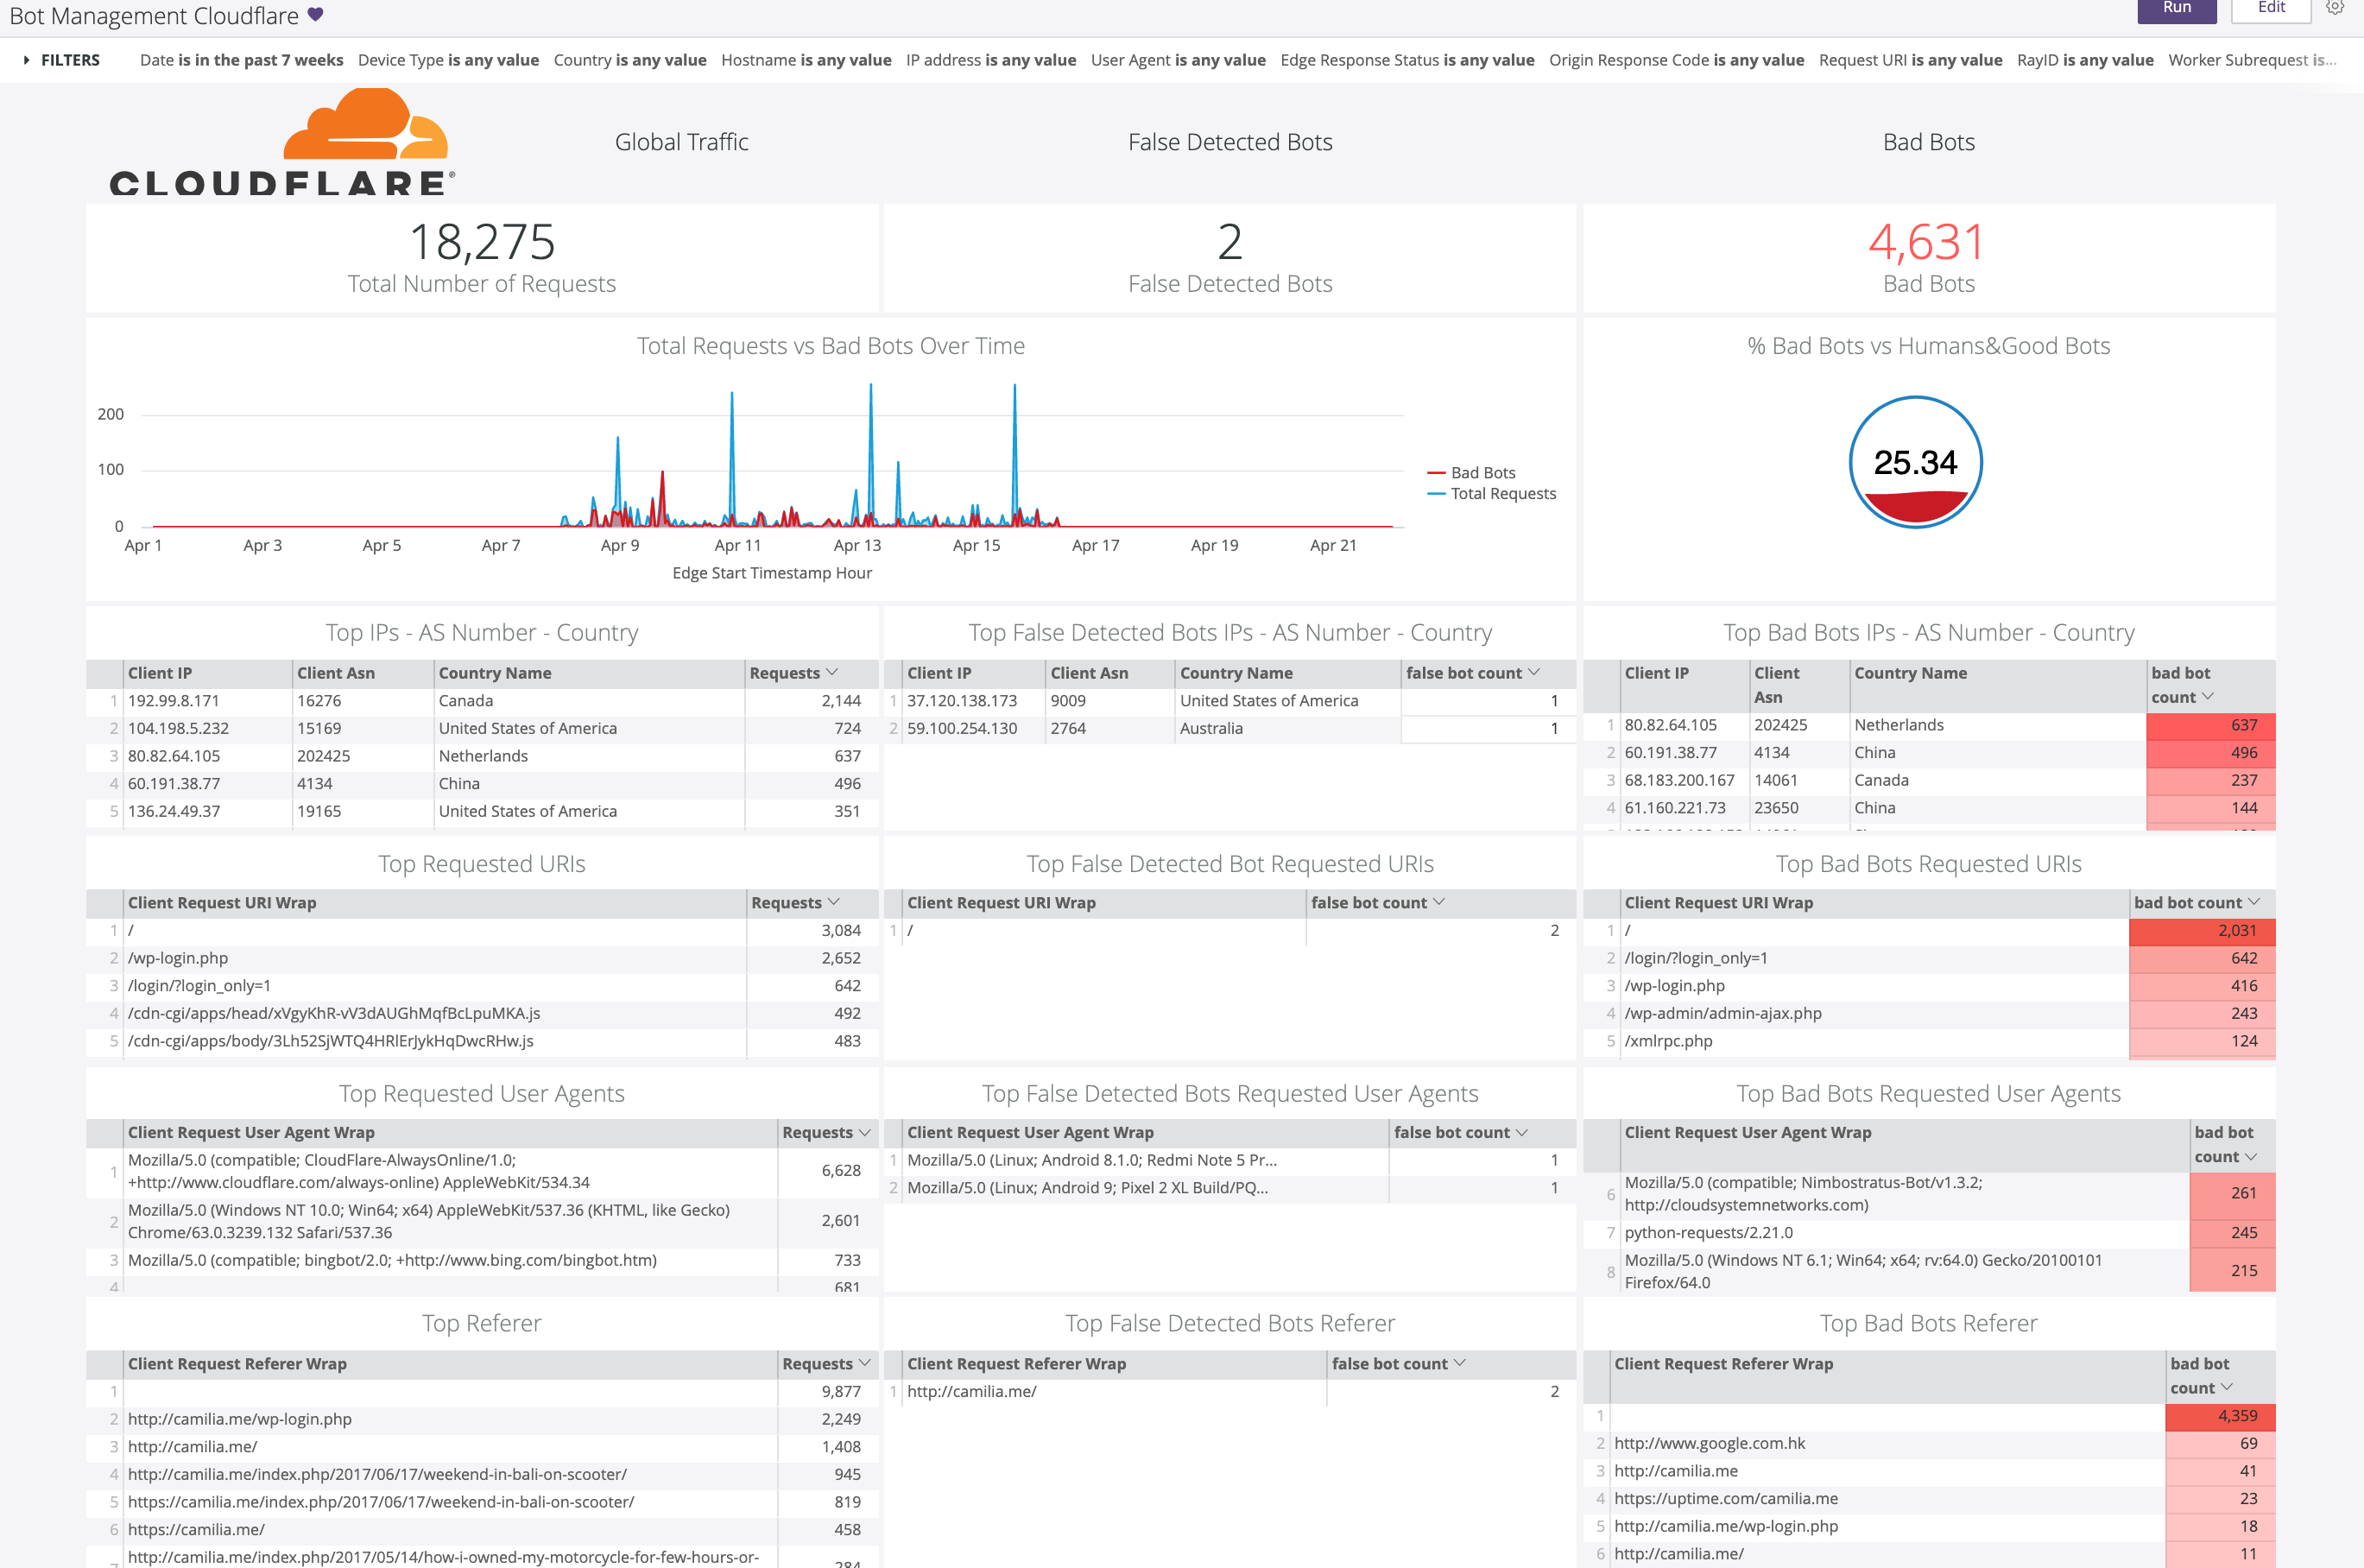 Looker dashboard highlighting Cloudflare metrics including Global Traffic, False Detected Bots, and Bad Bots